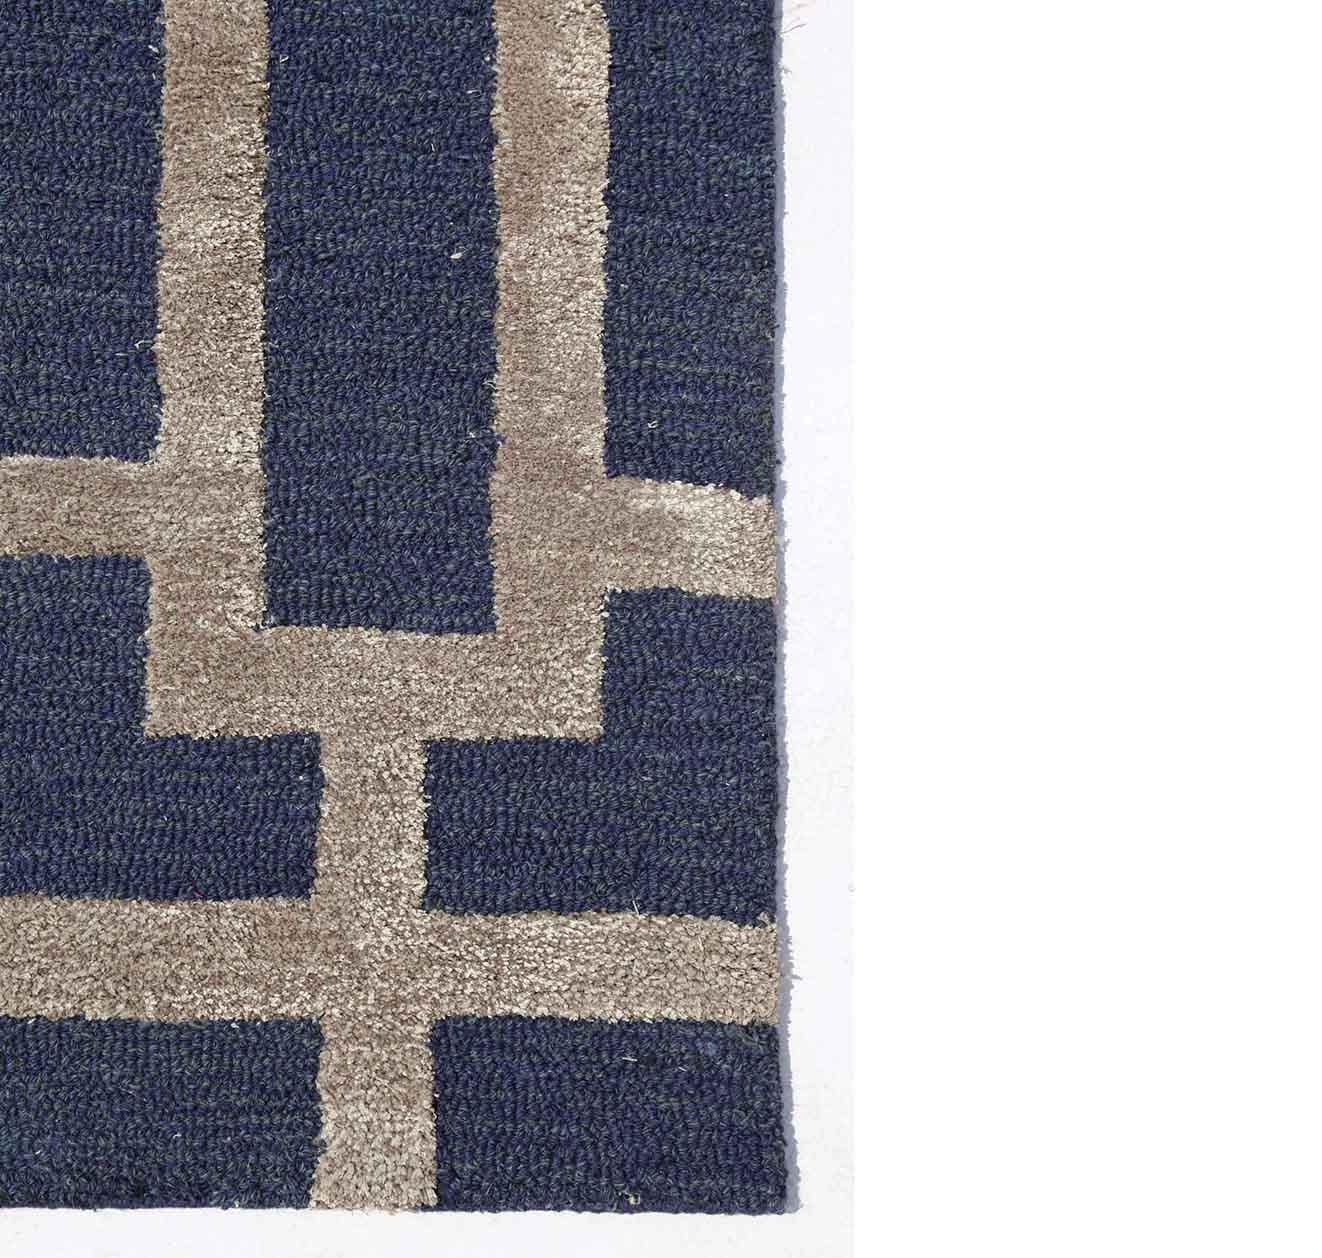 Discover a harmonious blend of modern design and age-old artistry with our hand-tufted rugs. Each piece is a canvas where contemporary patterns meet the soul of traditional hand-tufting techniques. Originating from Jaipur, a city renowned for its